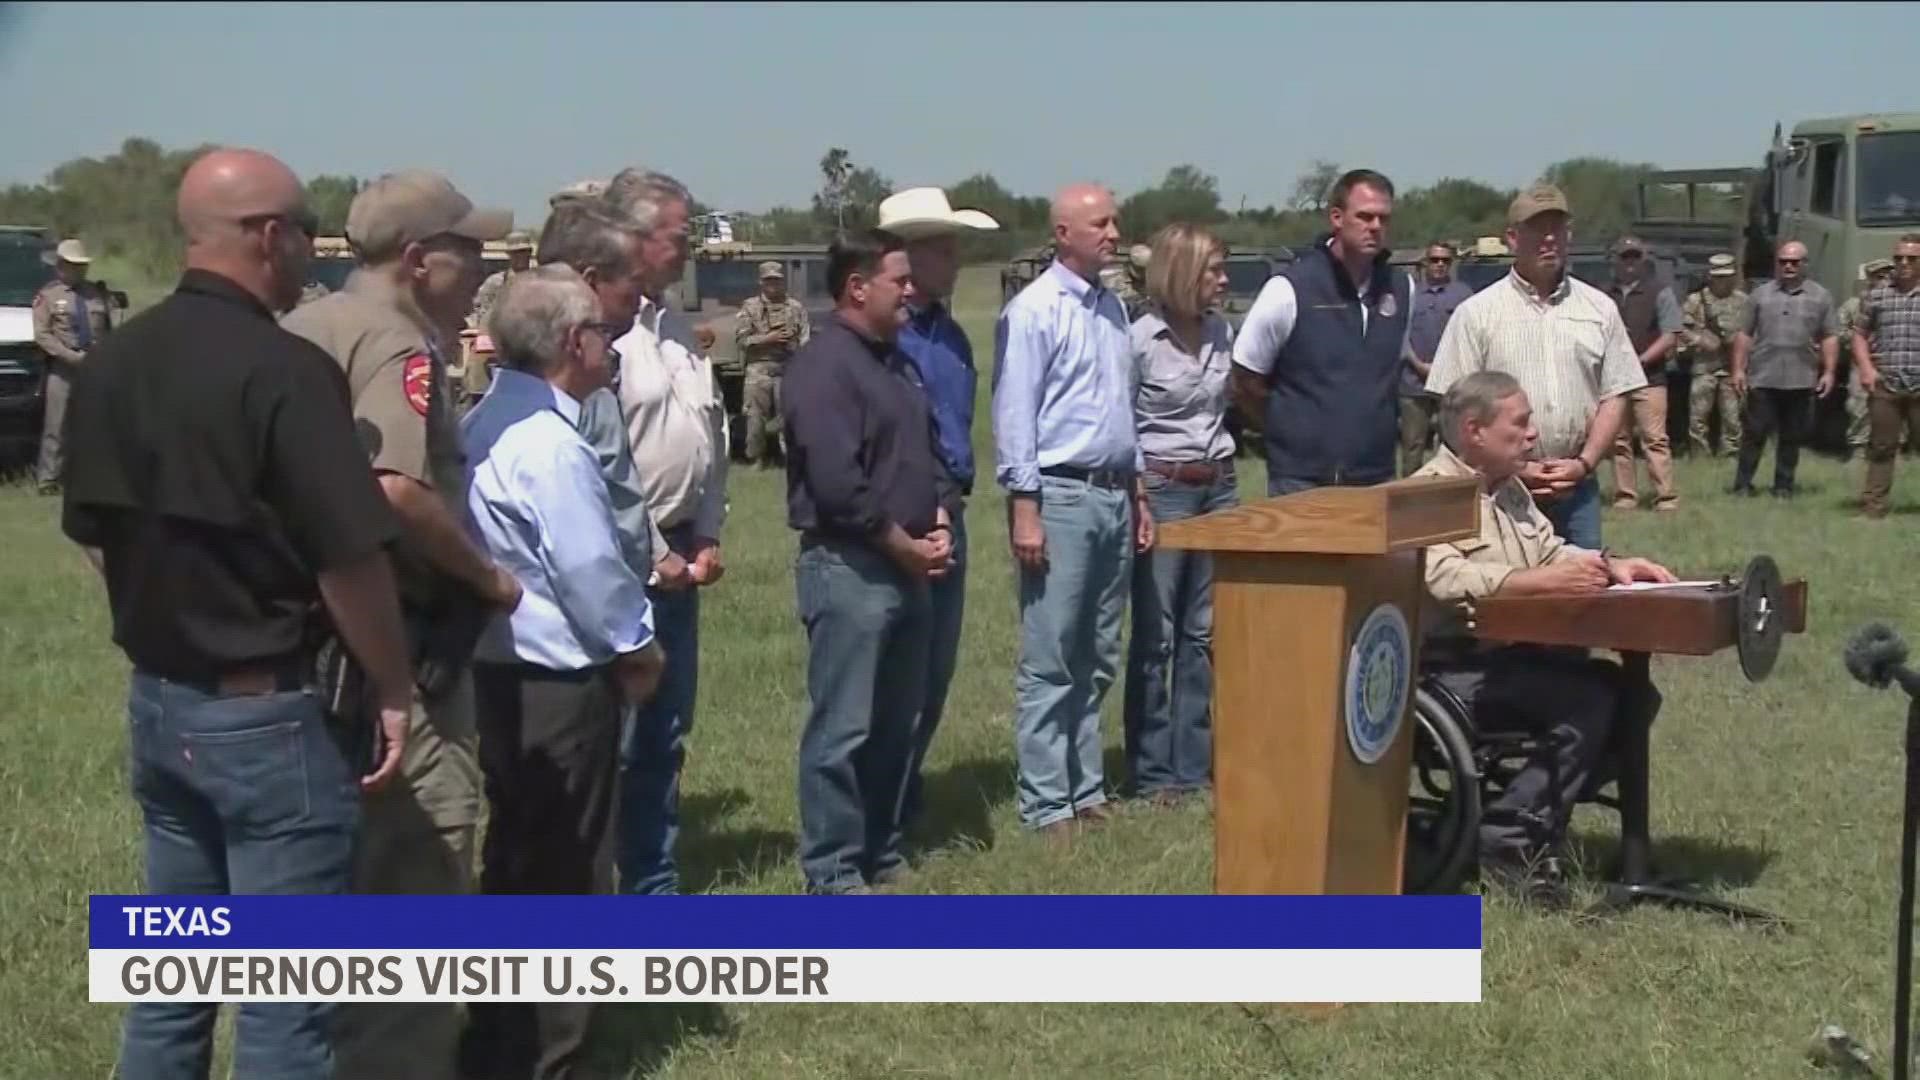 The Iowa governor joined other Republicans in Texas to address the crisis.